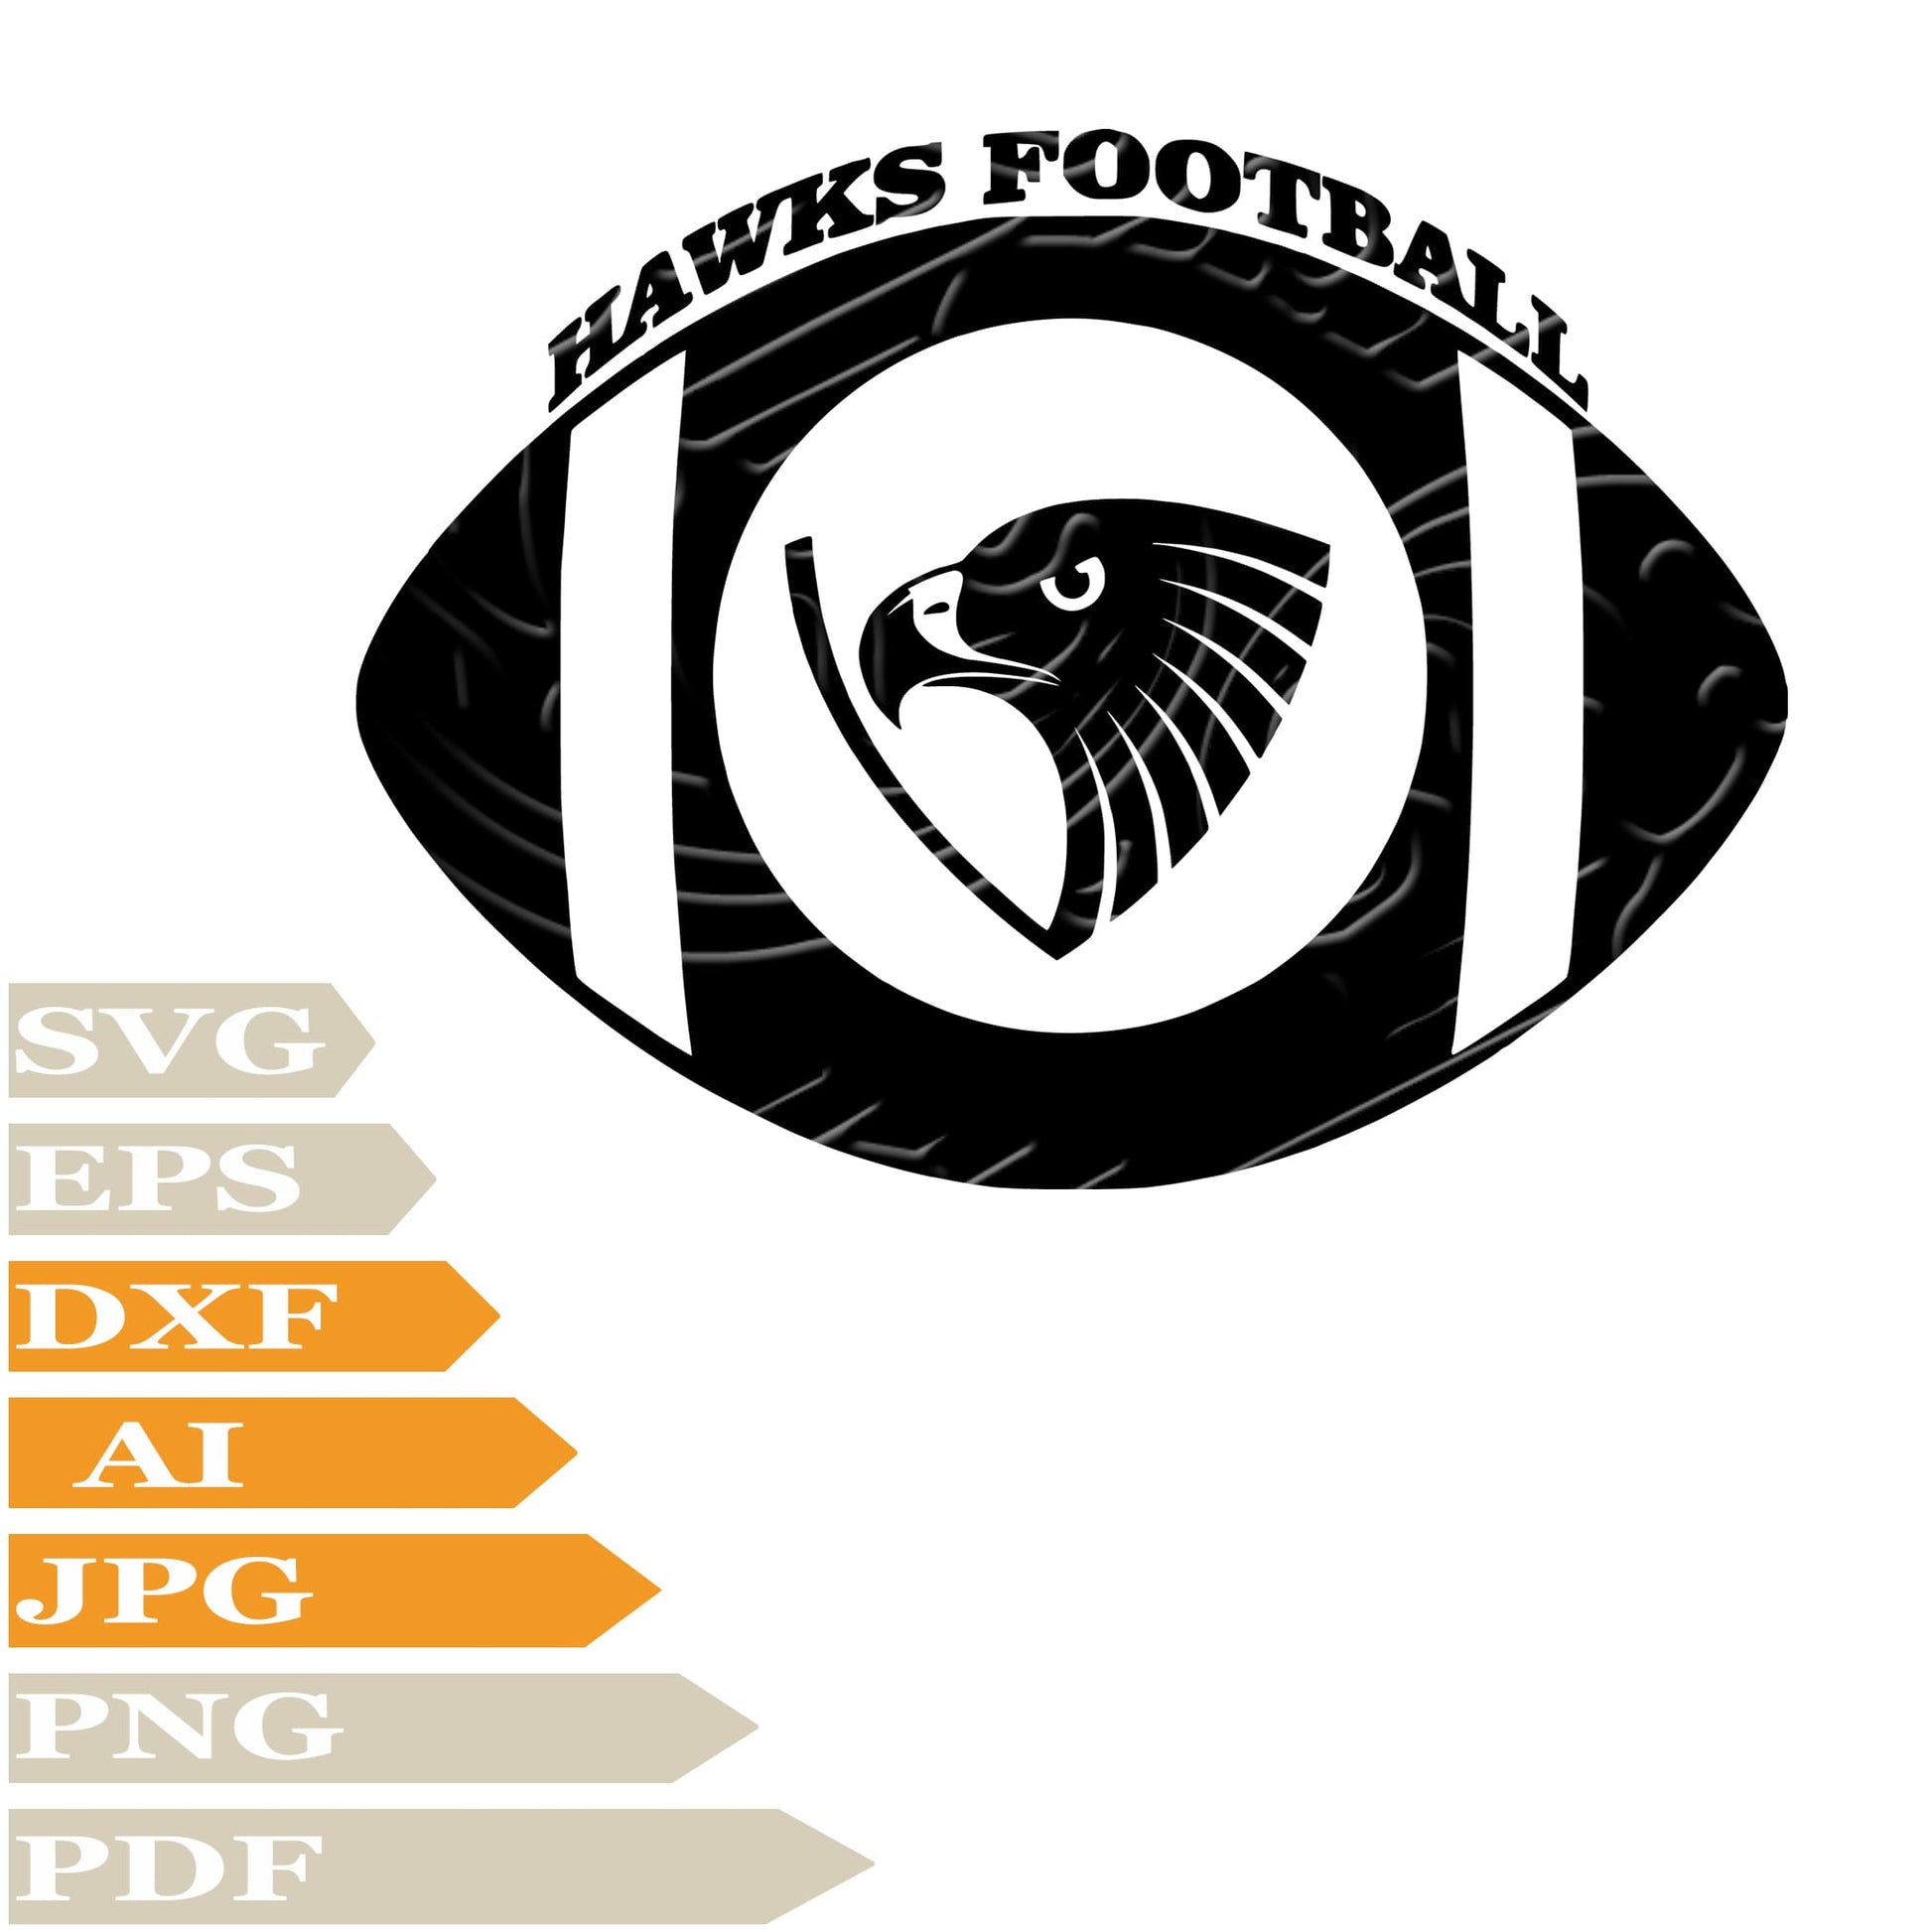 Hawks, Hawks Football Logo Svg File, Image Cut, Png, For Tattoo, Silhouette, Digital Vector Download, Cut File, Clipart, For Cricut